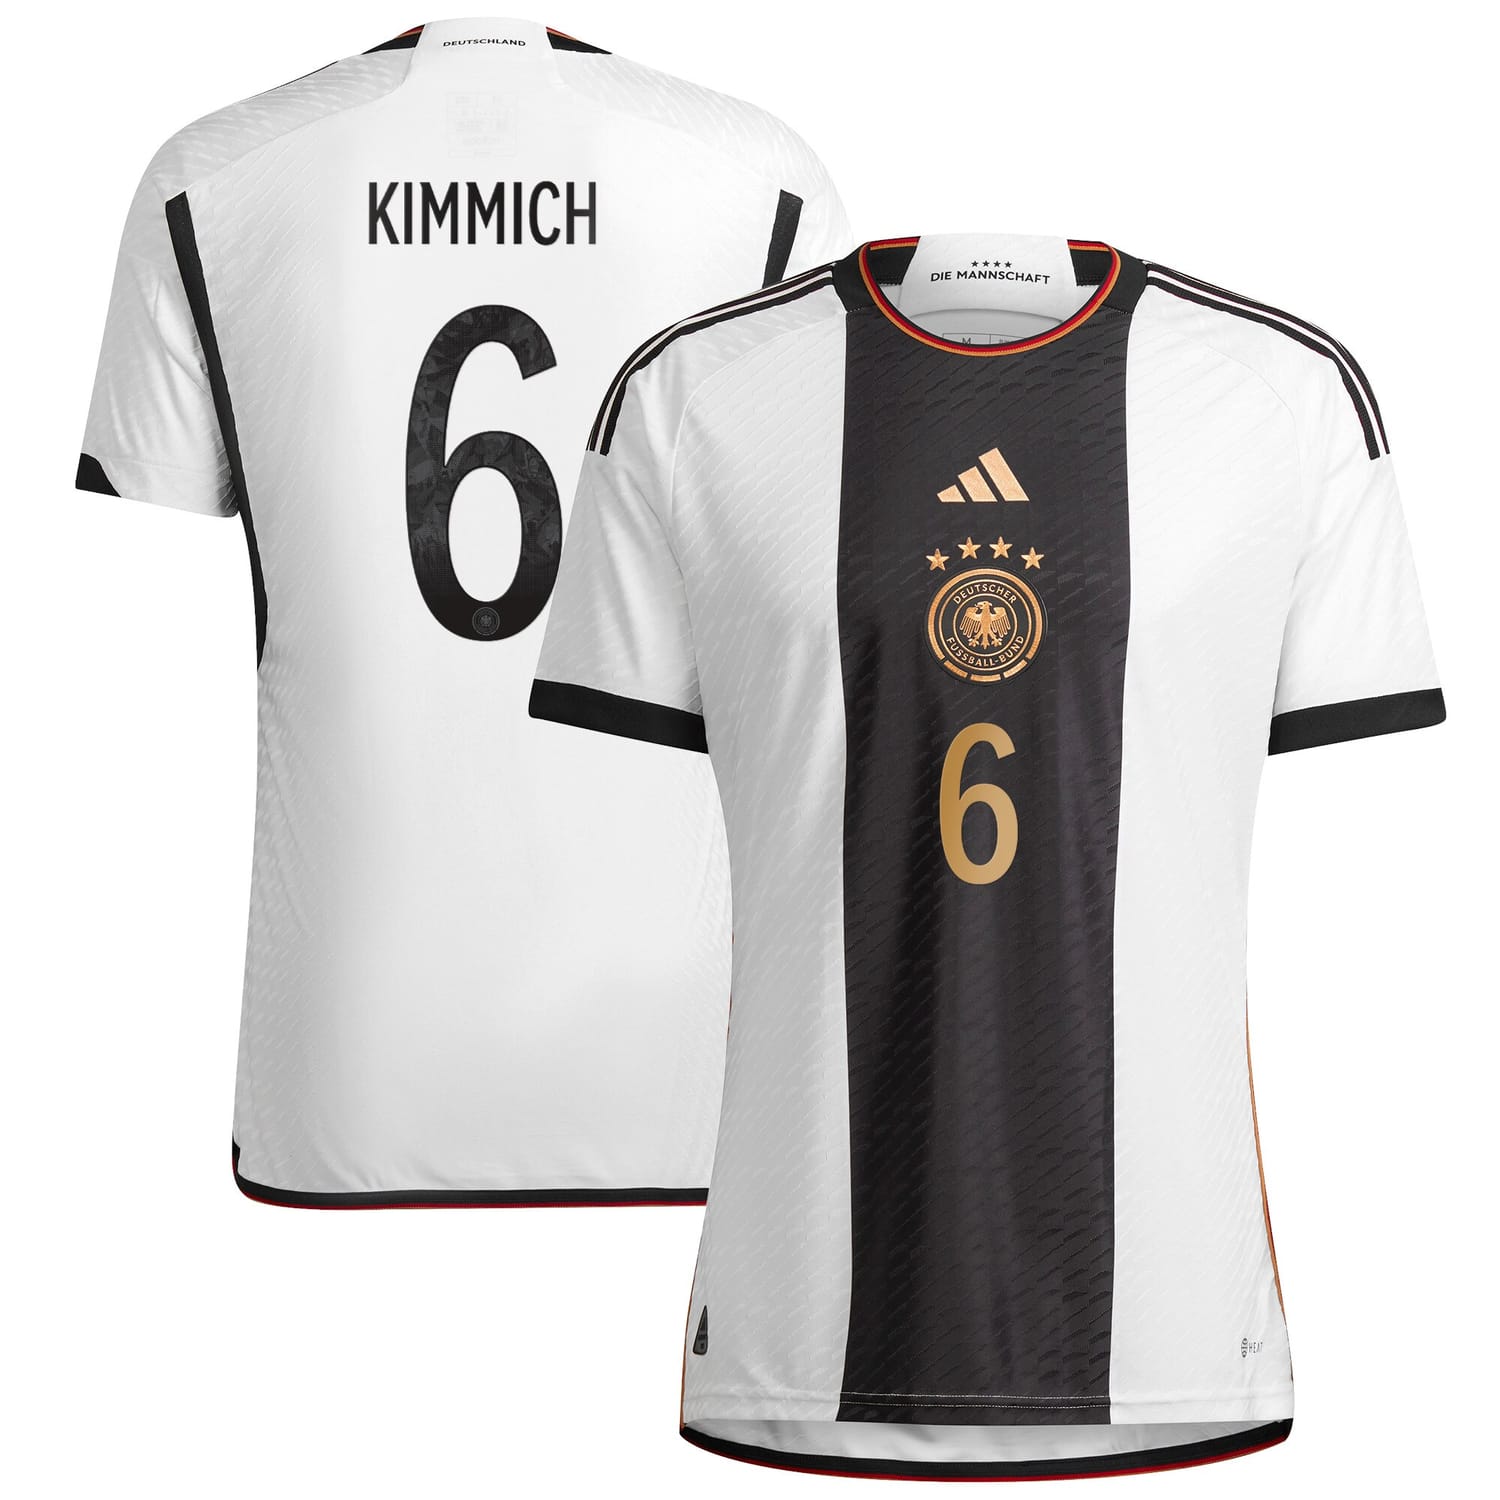 Germany National Team Home Authentic Jersey Shirt player Joshua Kimmich 6 printing for Men